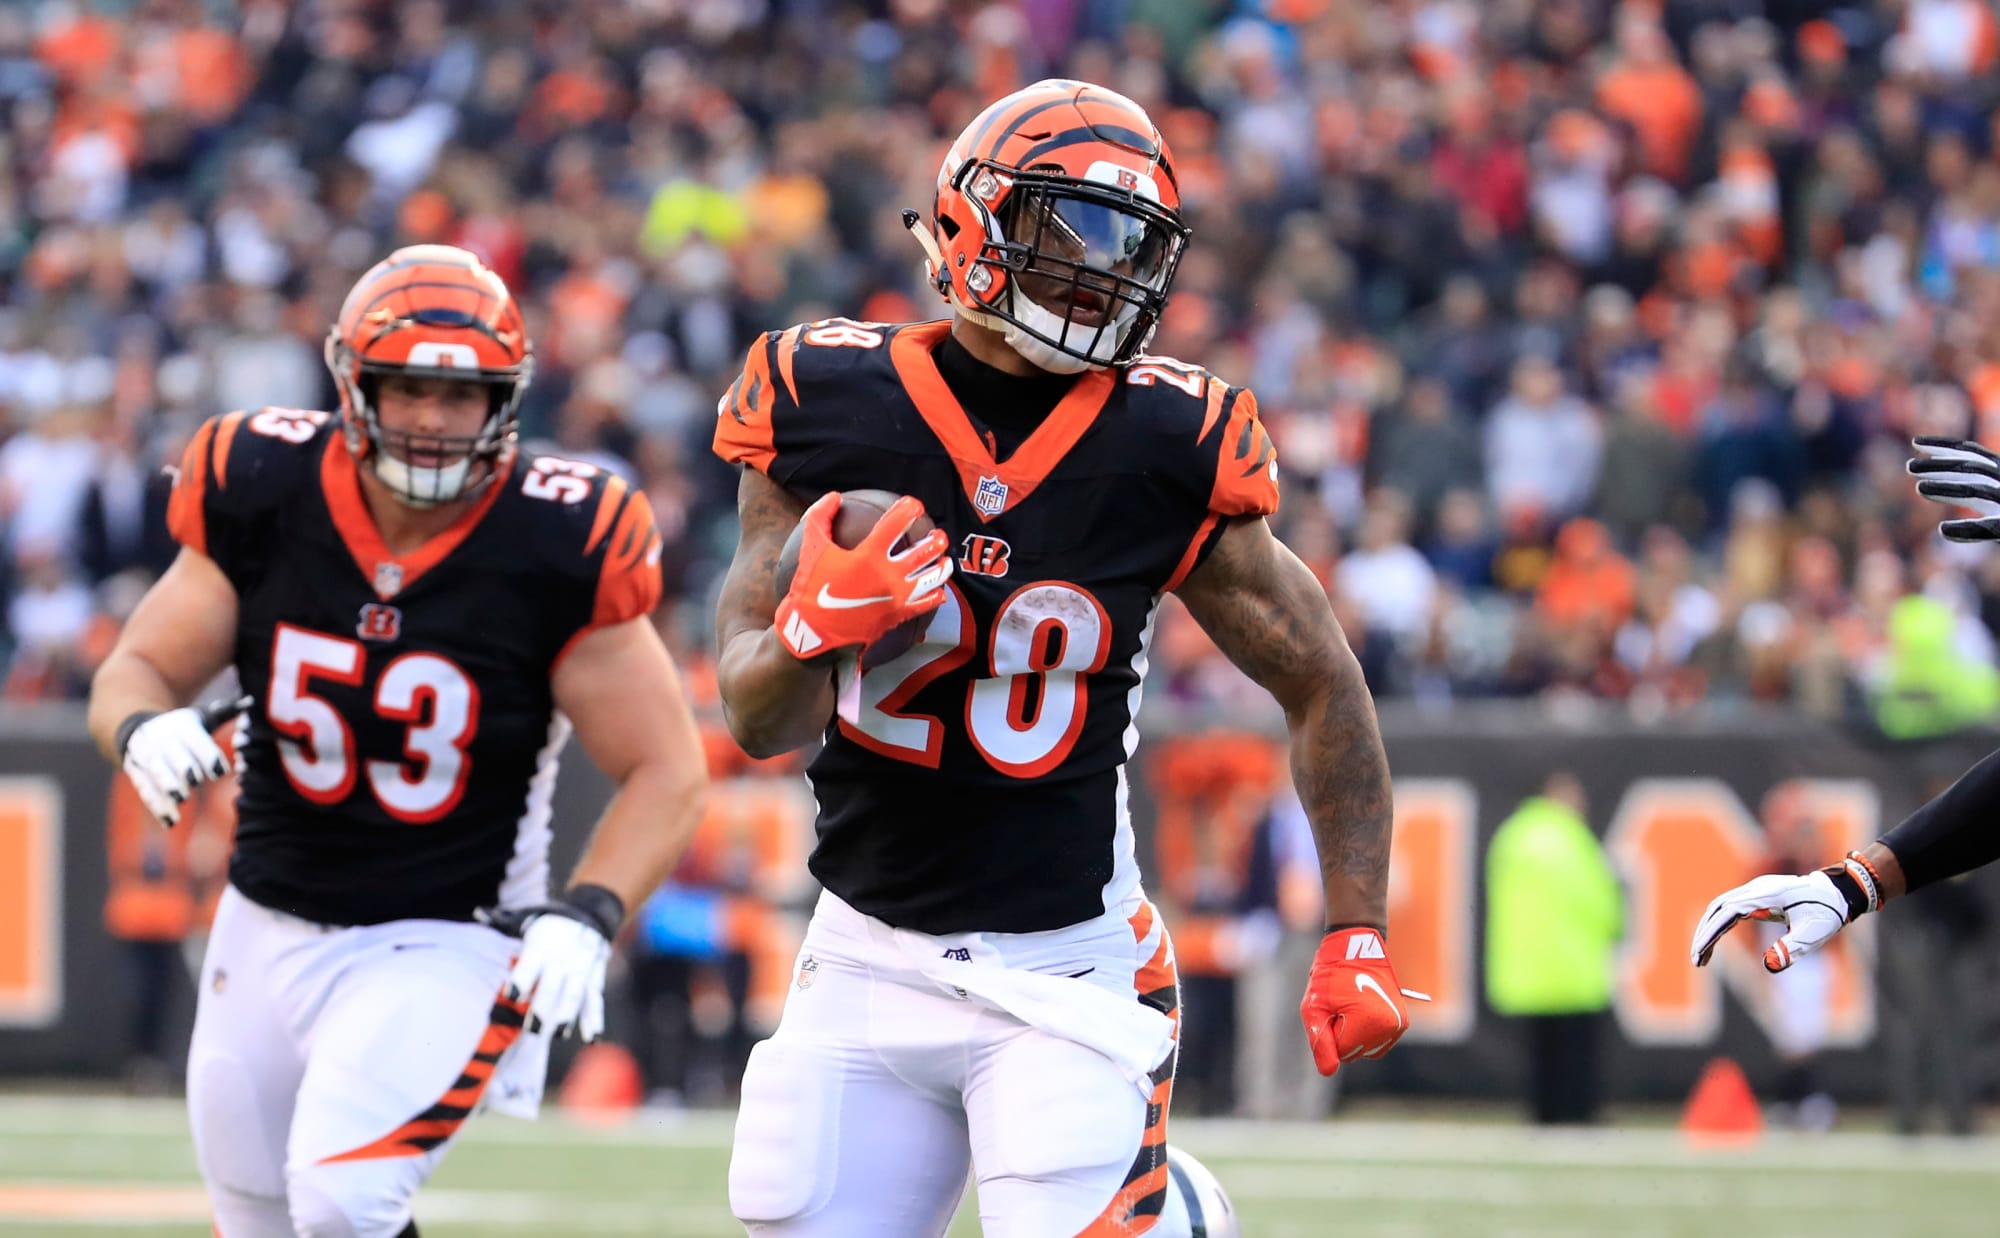 Cincinnati Bengals Running back position has its pros and cons